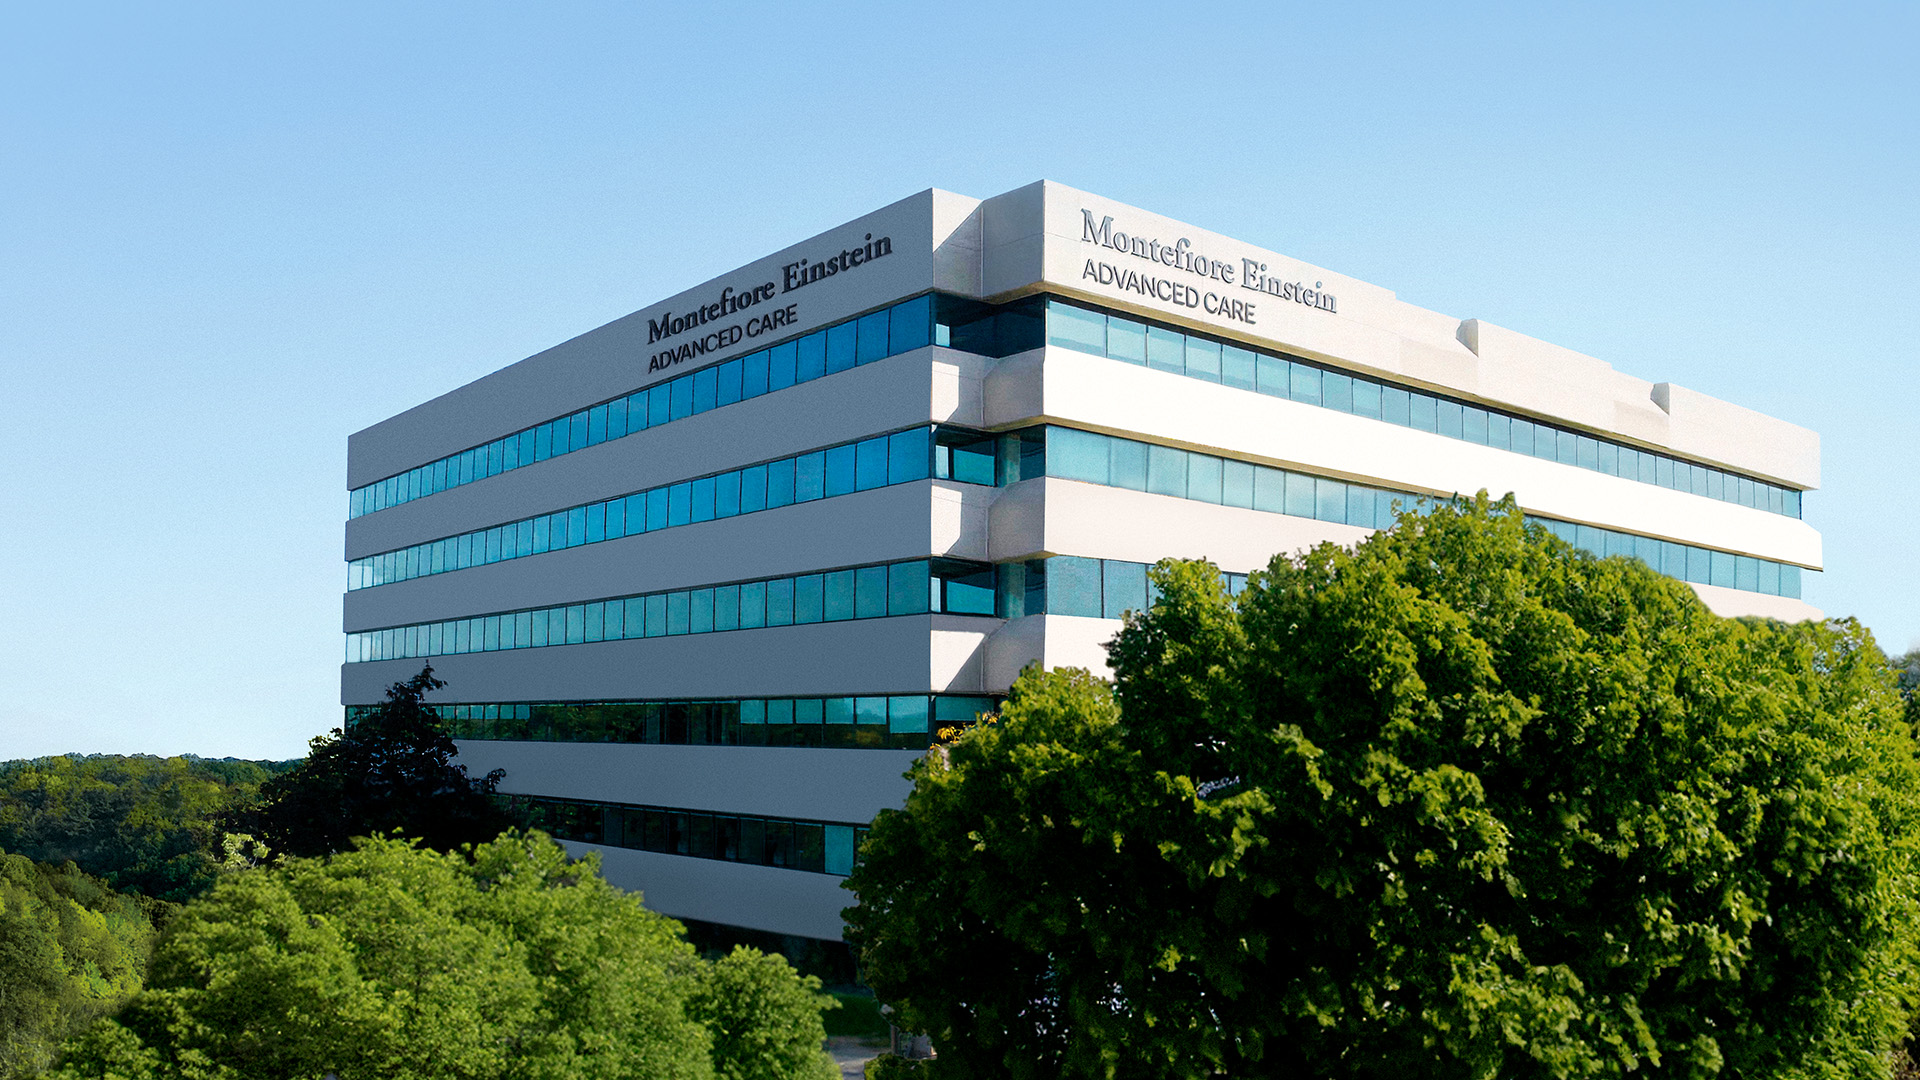 A view of the Montefiore Einstein Advanced Care building, bathed in sunlight on a clear summer day.